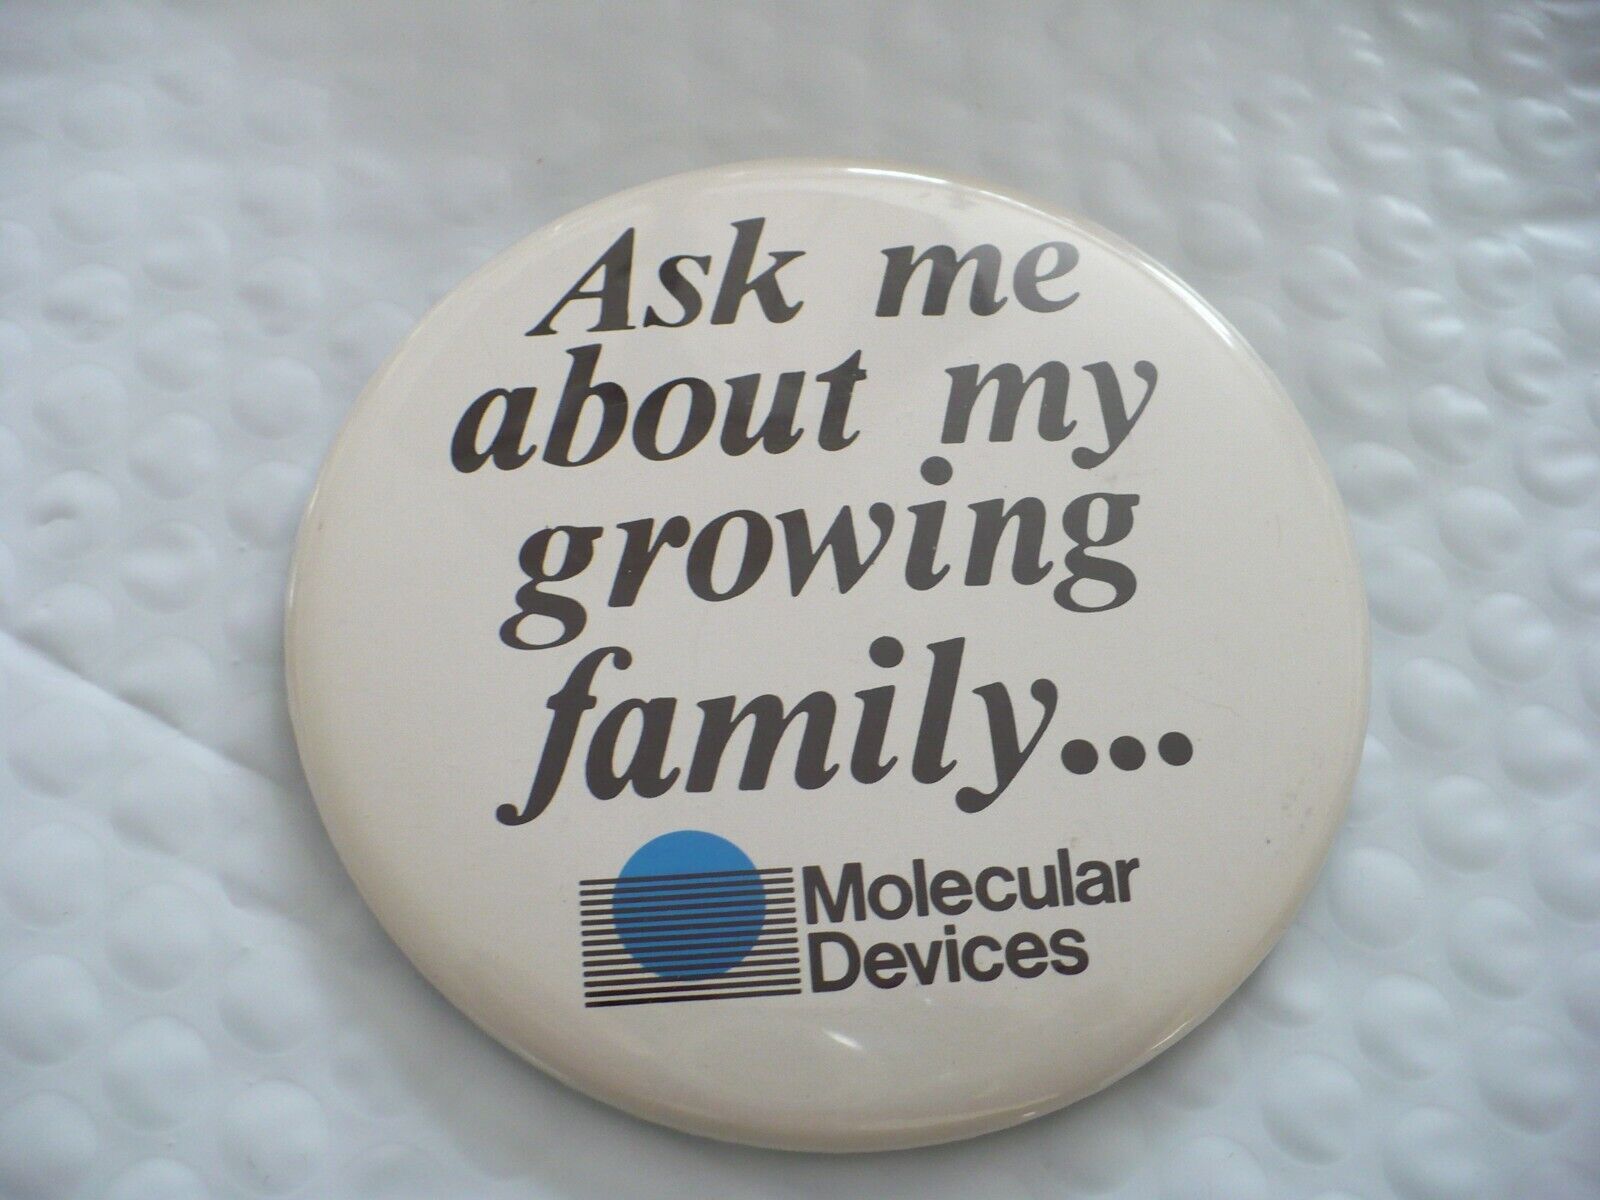 TT- VINTAGE ASK ME ABOUT GROWING FAMILY MOLECULAR DEVICES PIN BADGE #42082 (4 IN